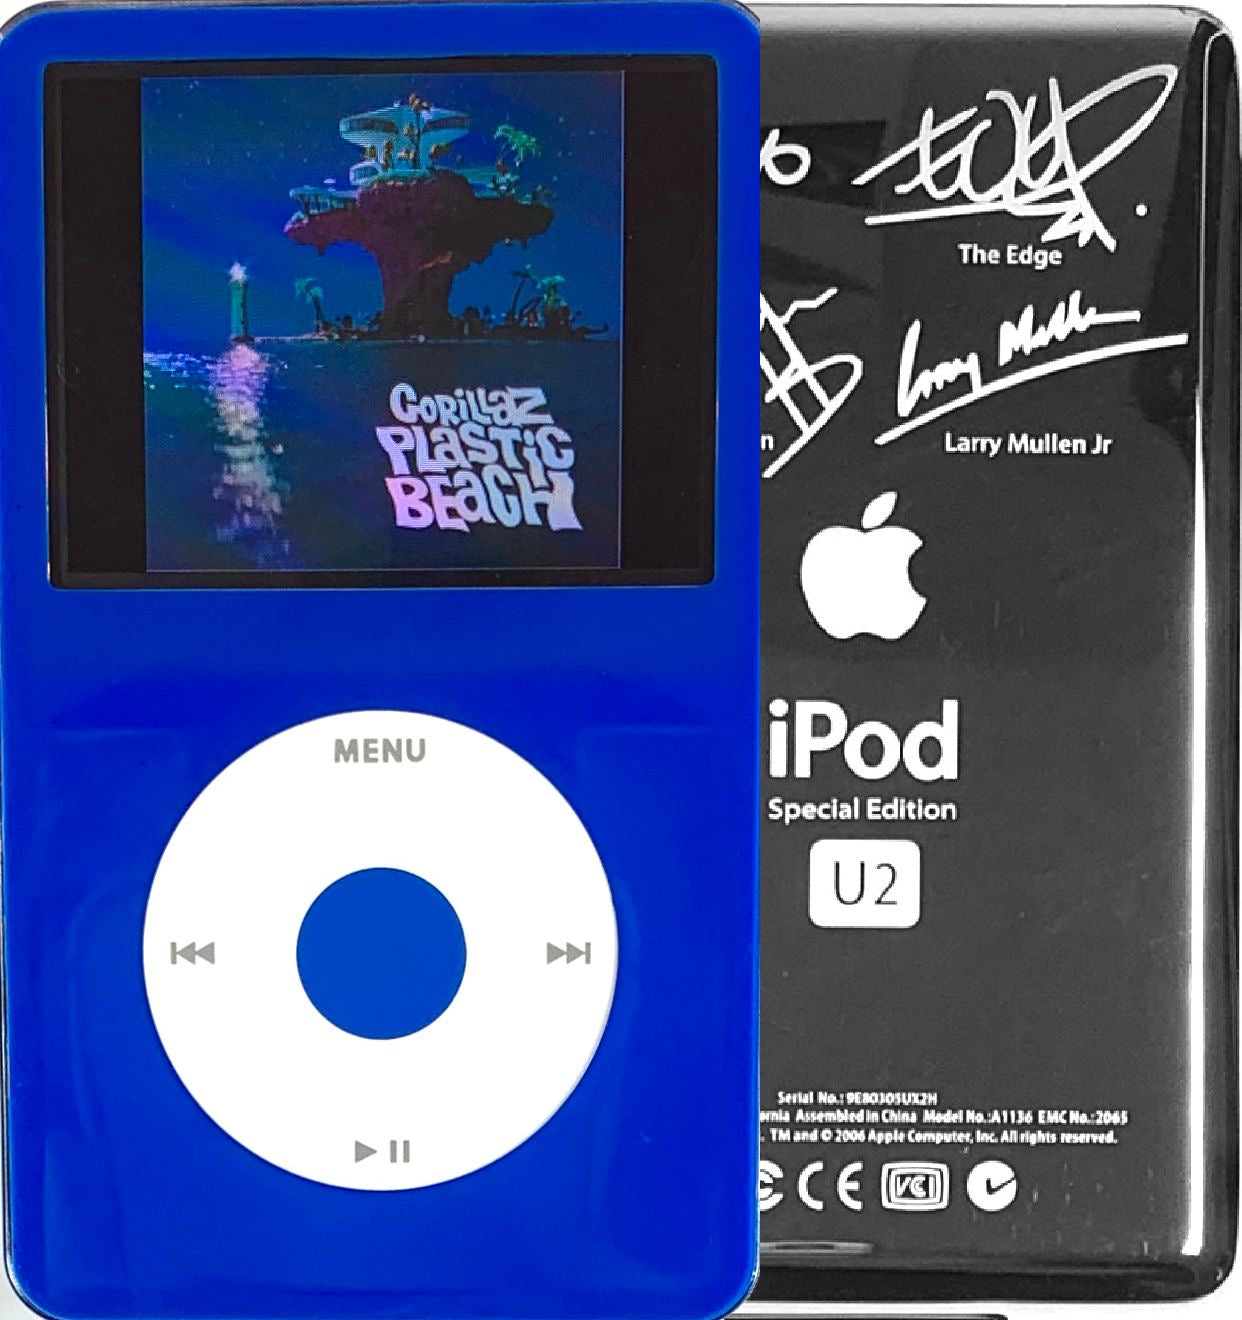 New Apple iPod Video Classic 5th & 5.5 Enhanced Blue / White / Blue (U2 Special Edition Silver)